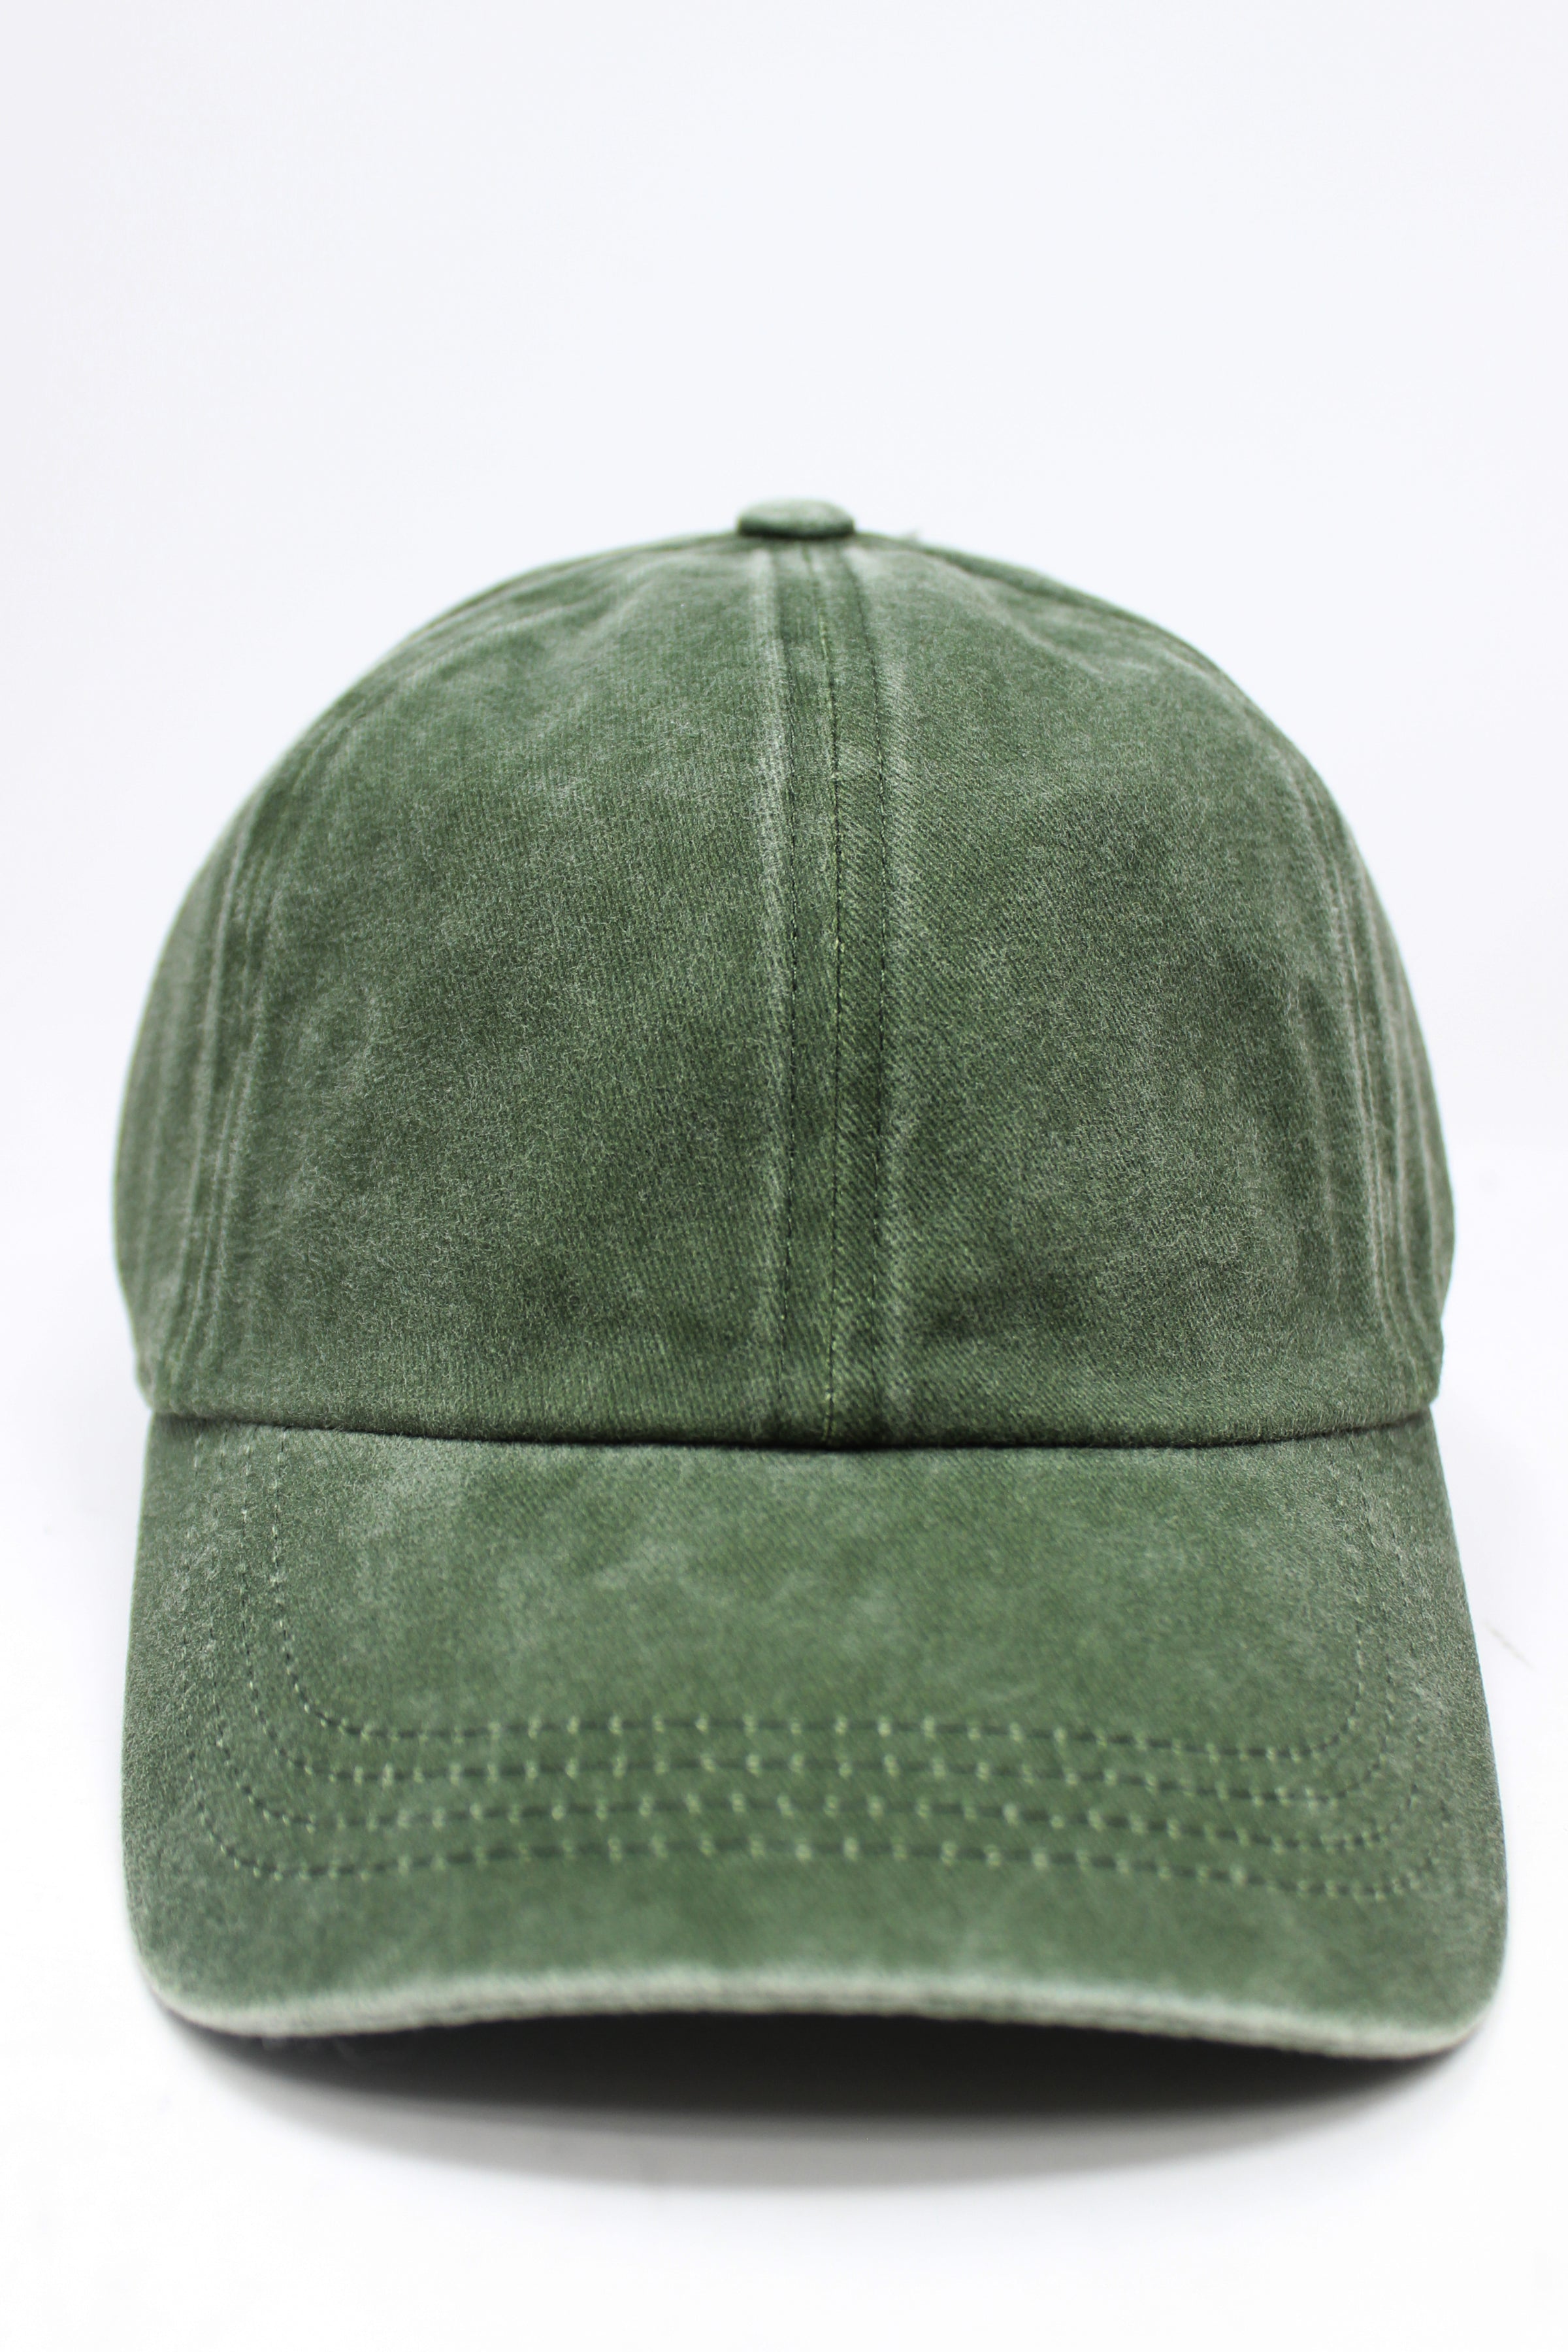 GWCAP18670 - Washed Twill 6 Panel Baseball Cap Buckle Adjustable Closure